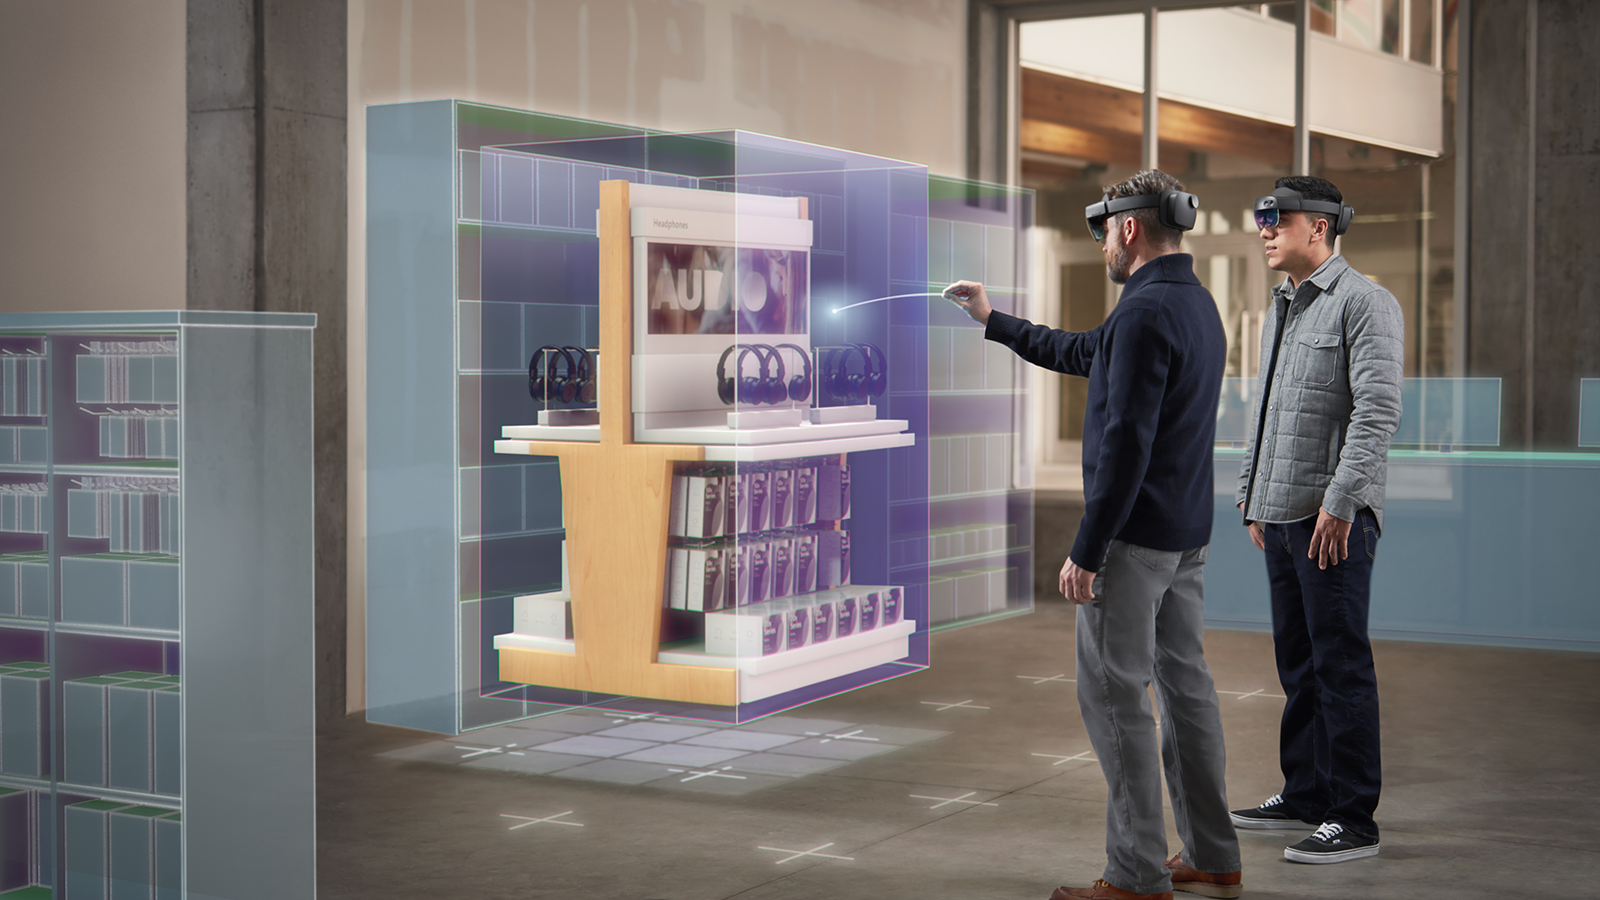 springe betaling livstid What is mixed reality? - Mixed Reality | Microsoft Learn